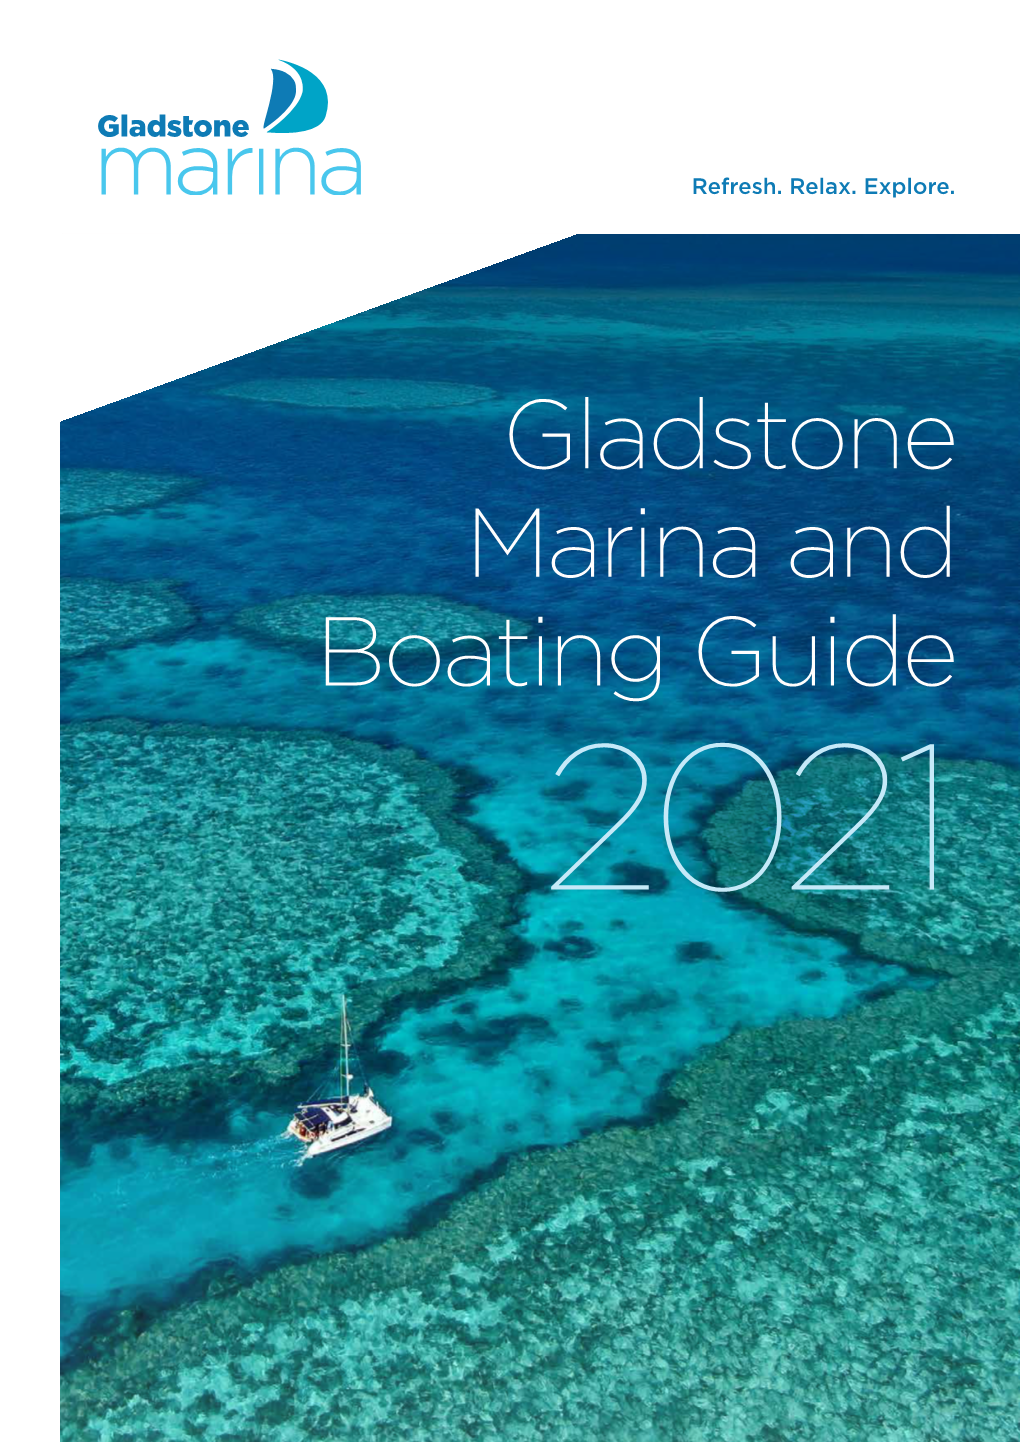 Gladstone Marina and Boating Guide 2021 Contents Welcome to Gladstone Marina